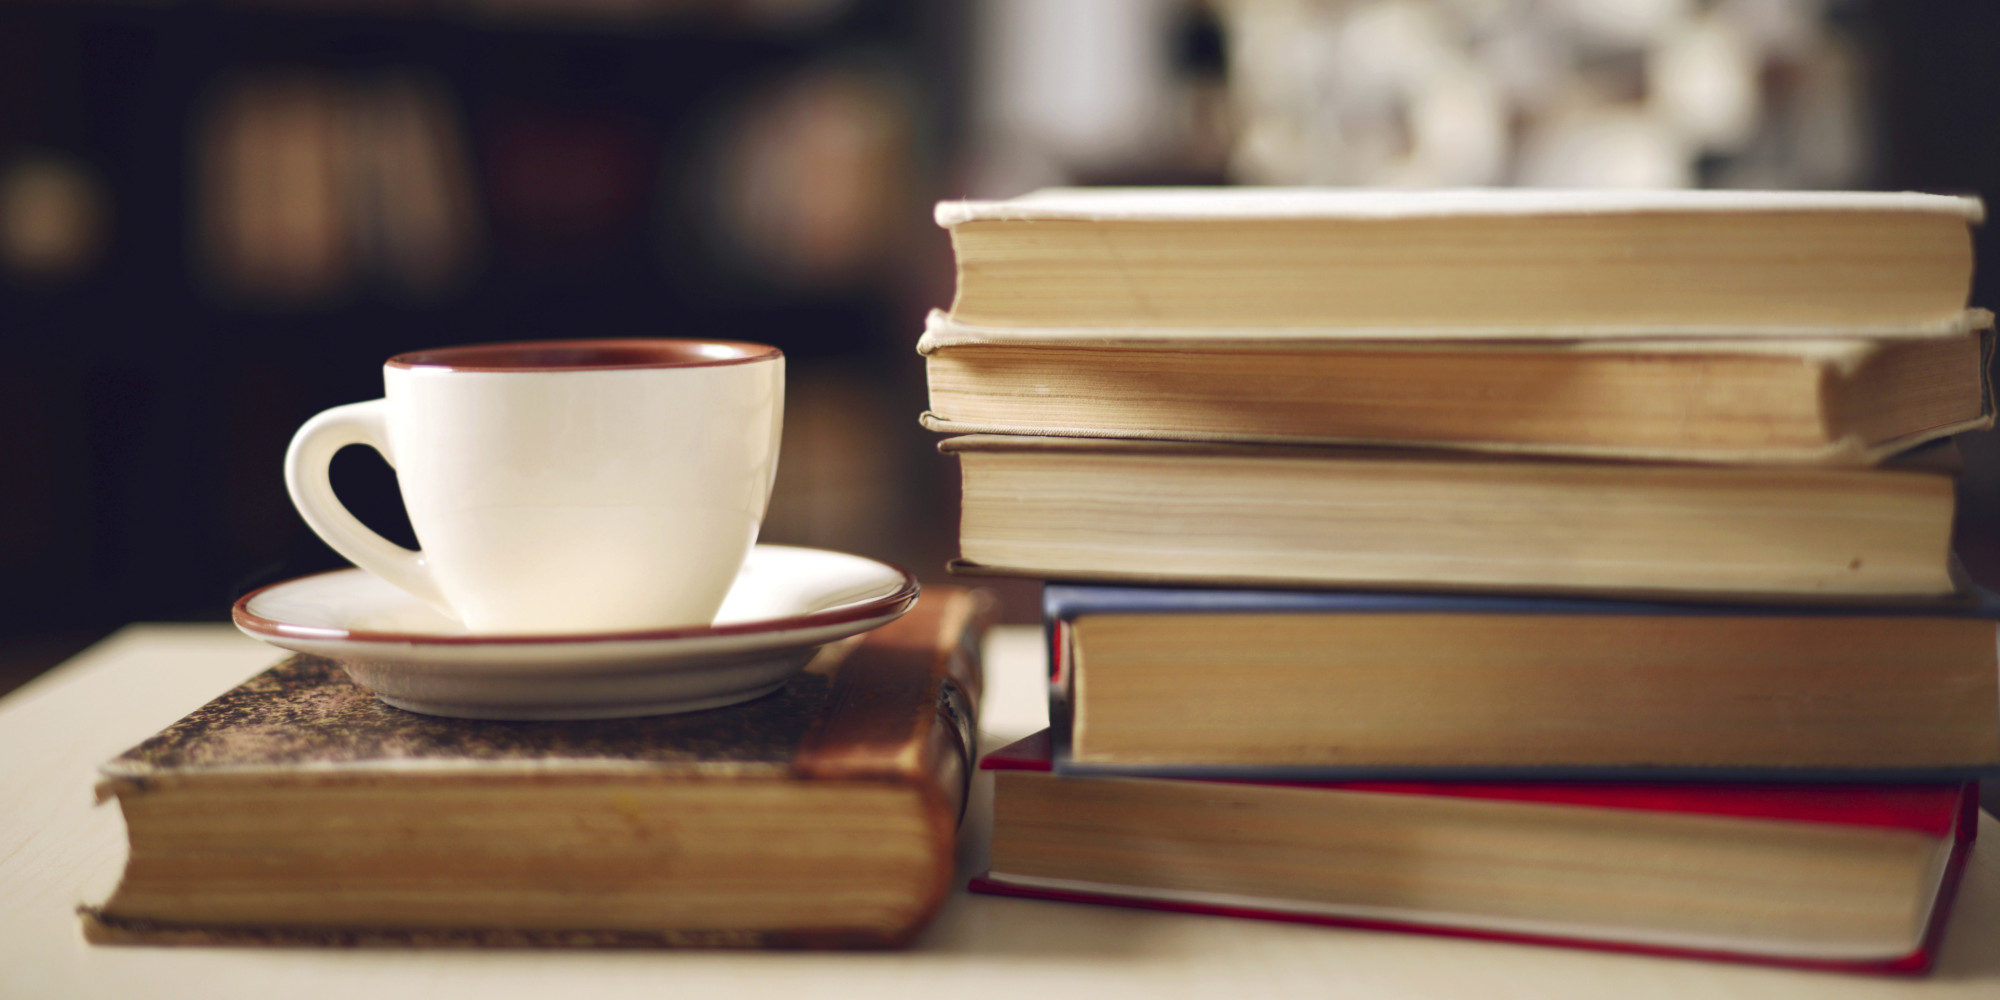 cup of tea on some books